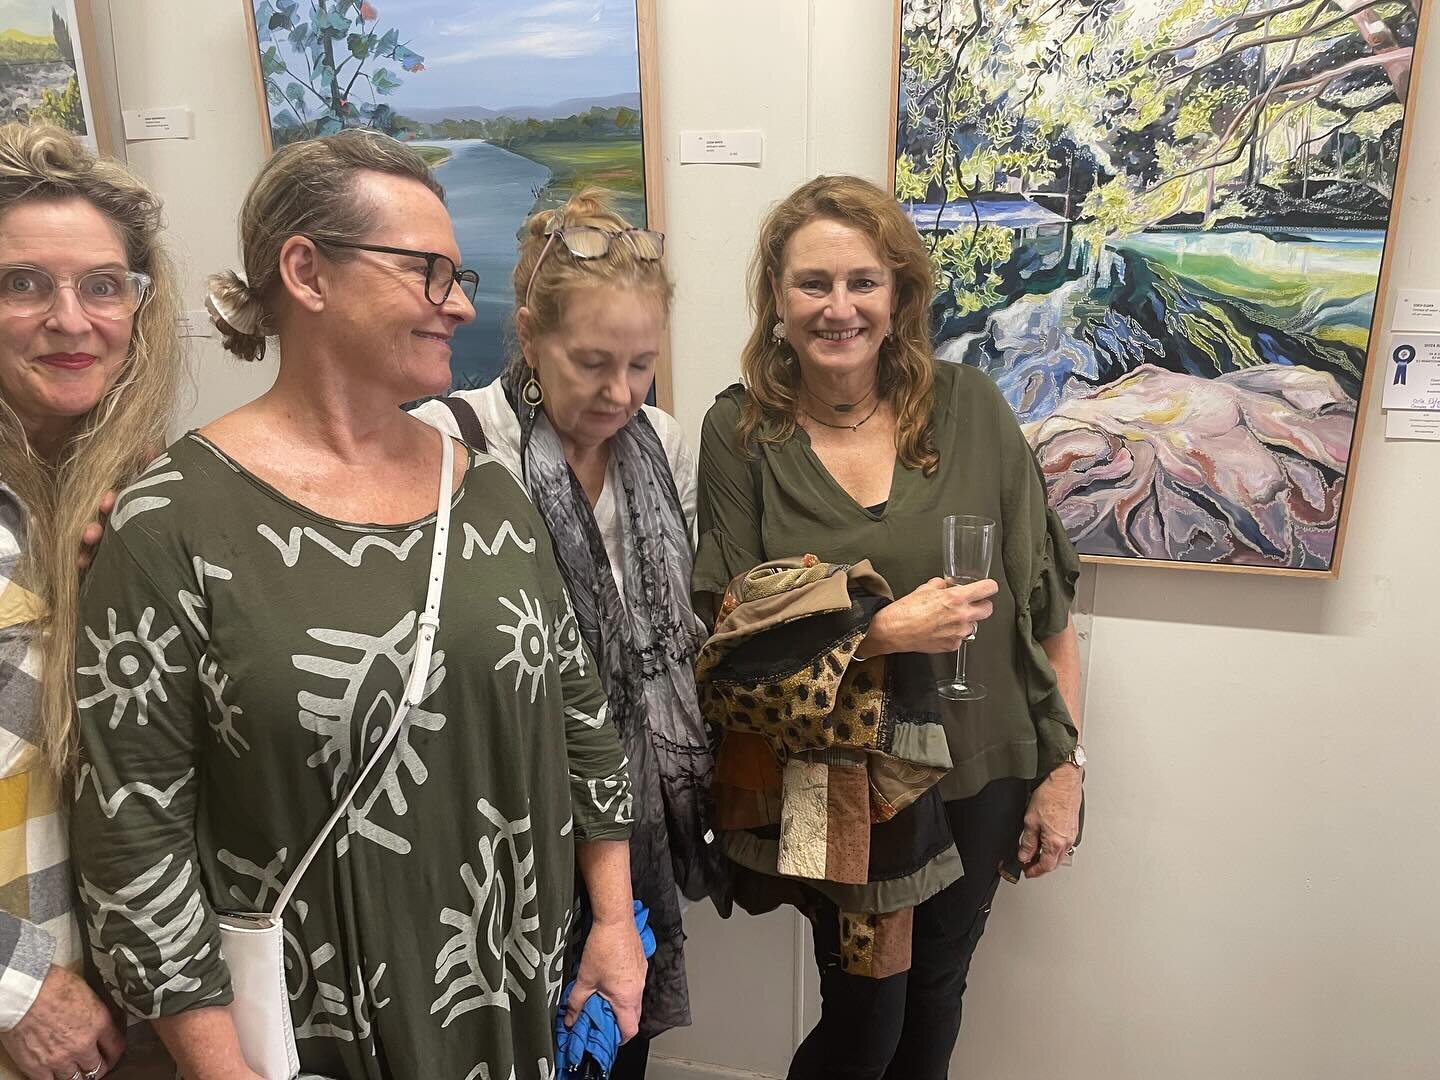 Fun night last night at the Opening of the Mantova Art Prize, held in conjunction with the upcoming @bellingen_show 

I was overjoyed  to win a prize in the Landscape Section held for the first time this year @bellingengallery hanging amongst some ex